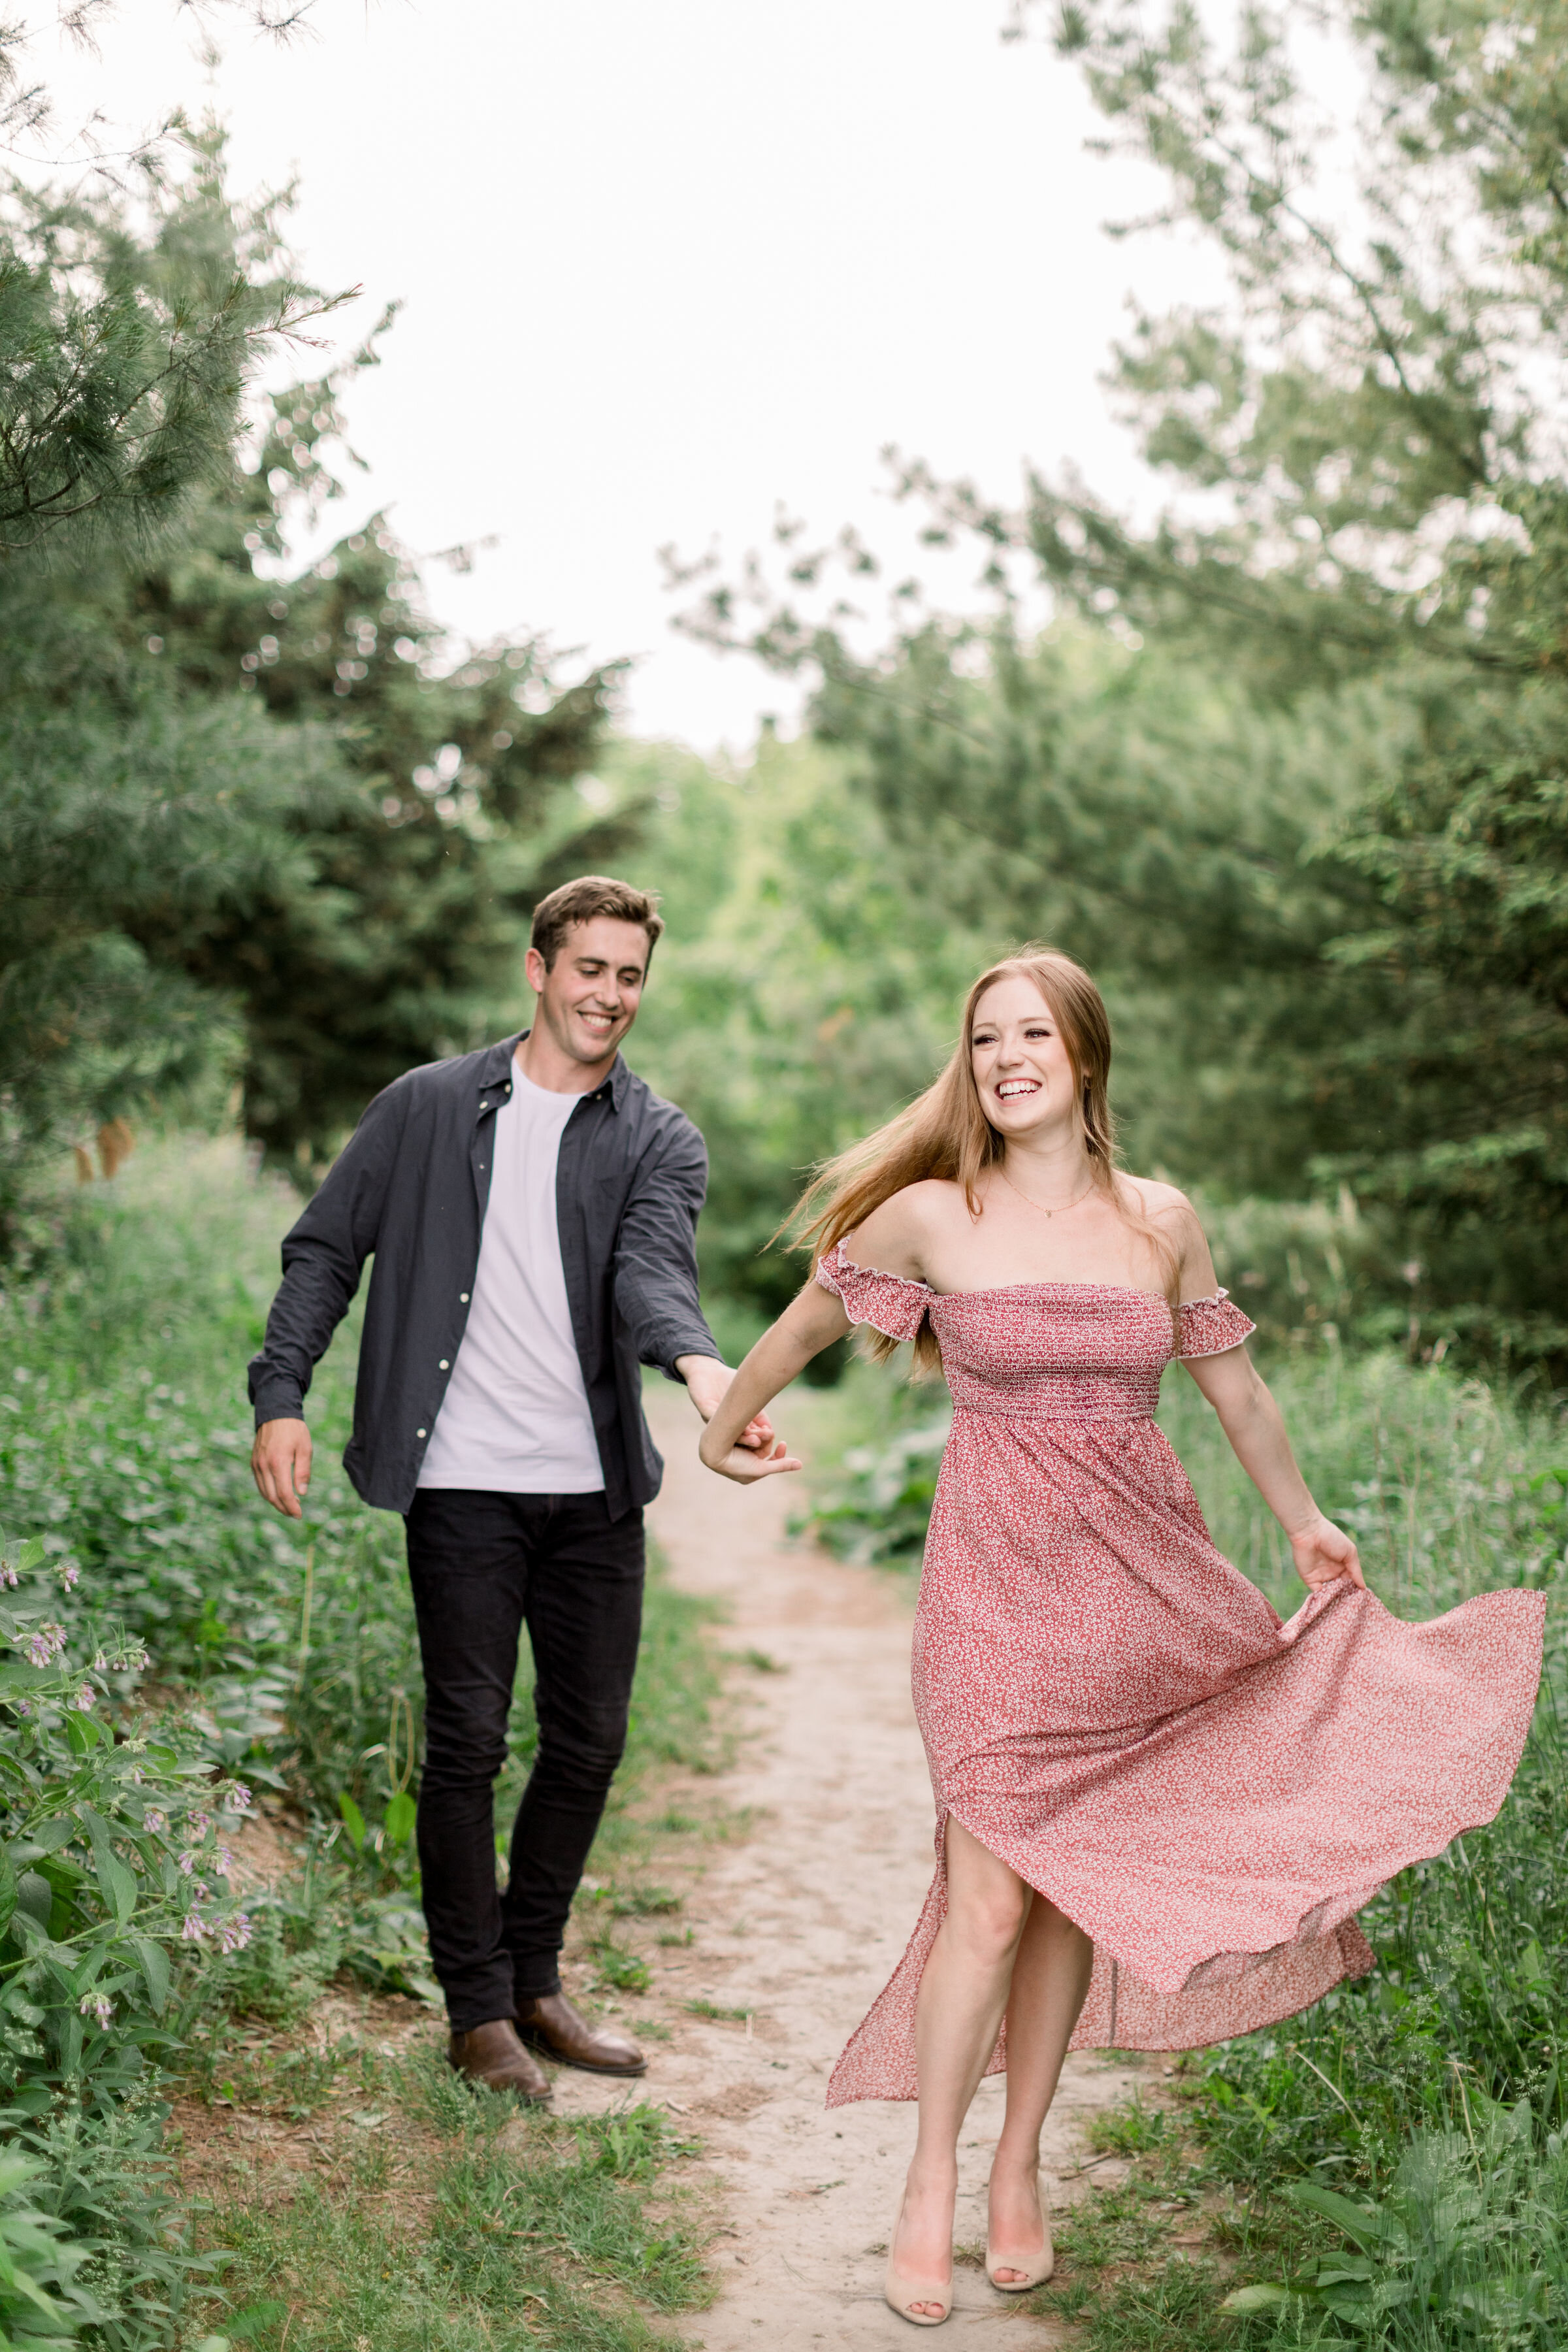  In Arboretum, Ottawa, Chelsea Mason Photography captures this soon-to-be bride playfully leading her fiancé through an unpaved shaded pathway during their engagement shoot. playful running engagement poses formal engagement outfits women's off the s